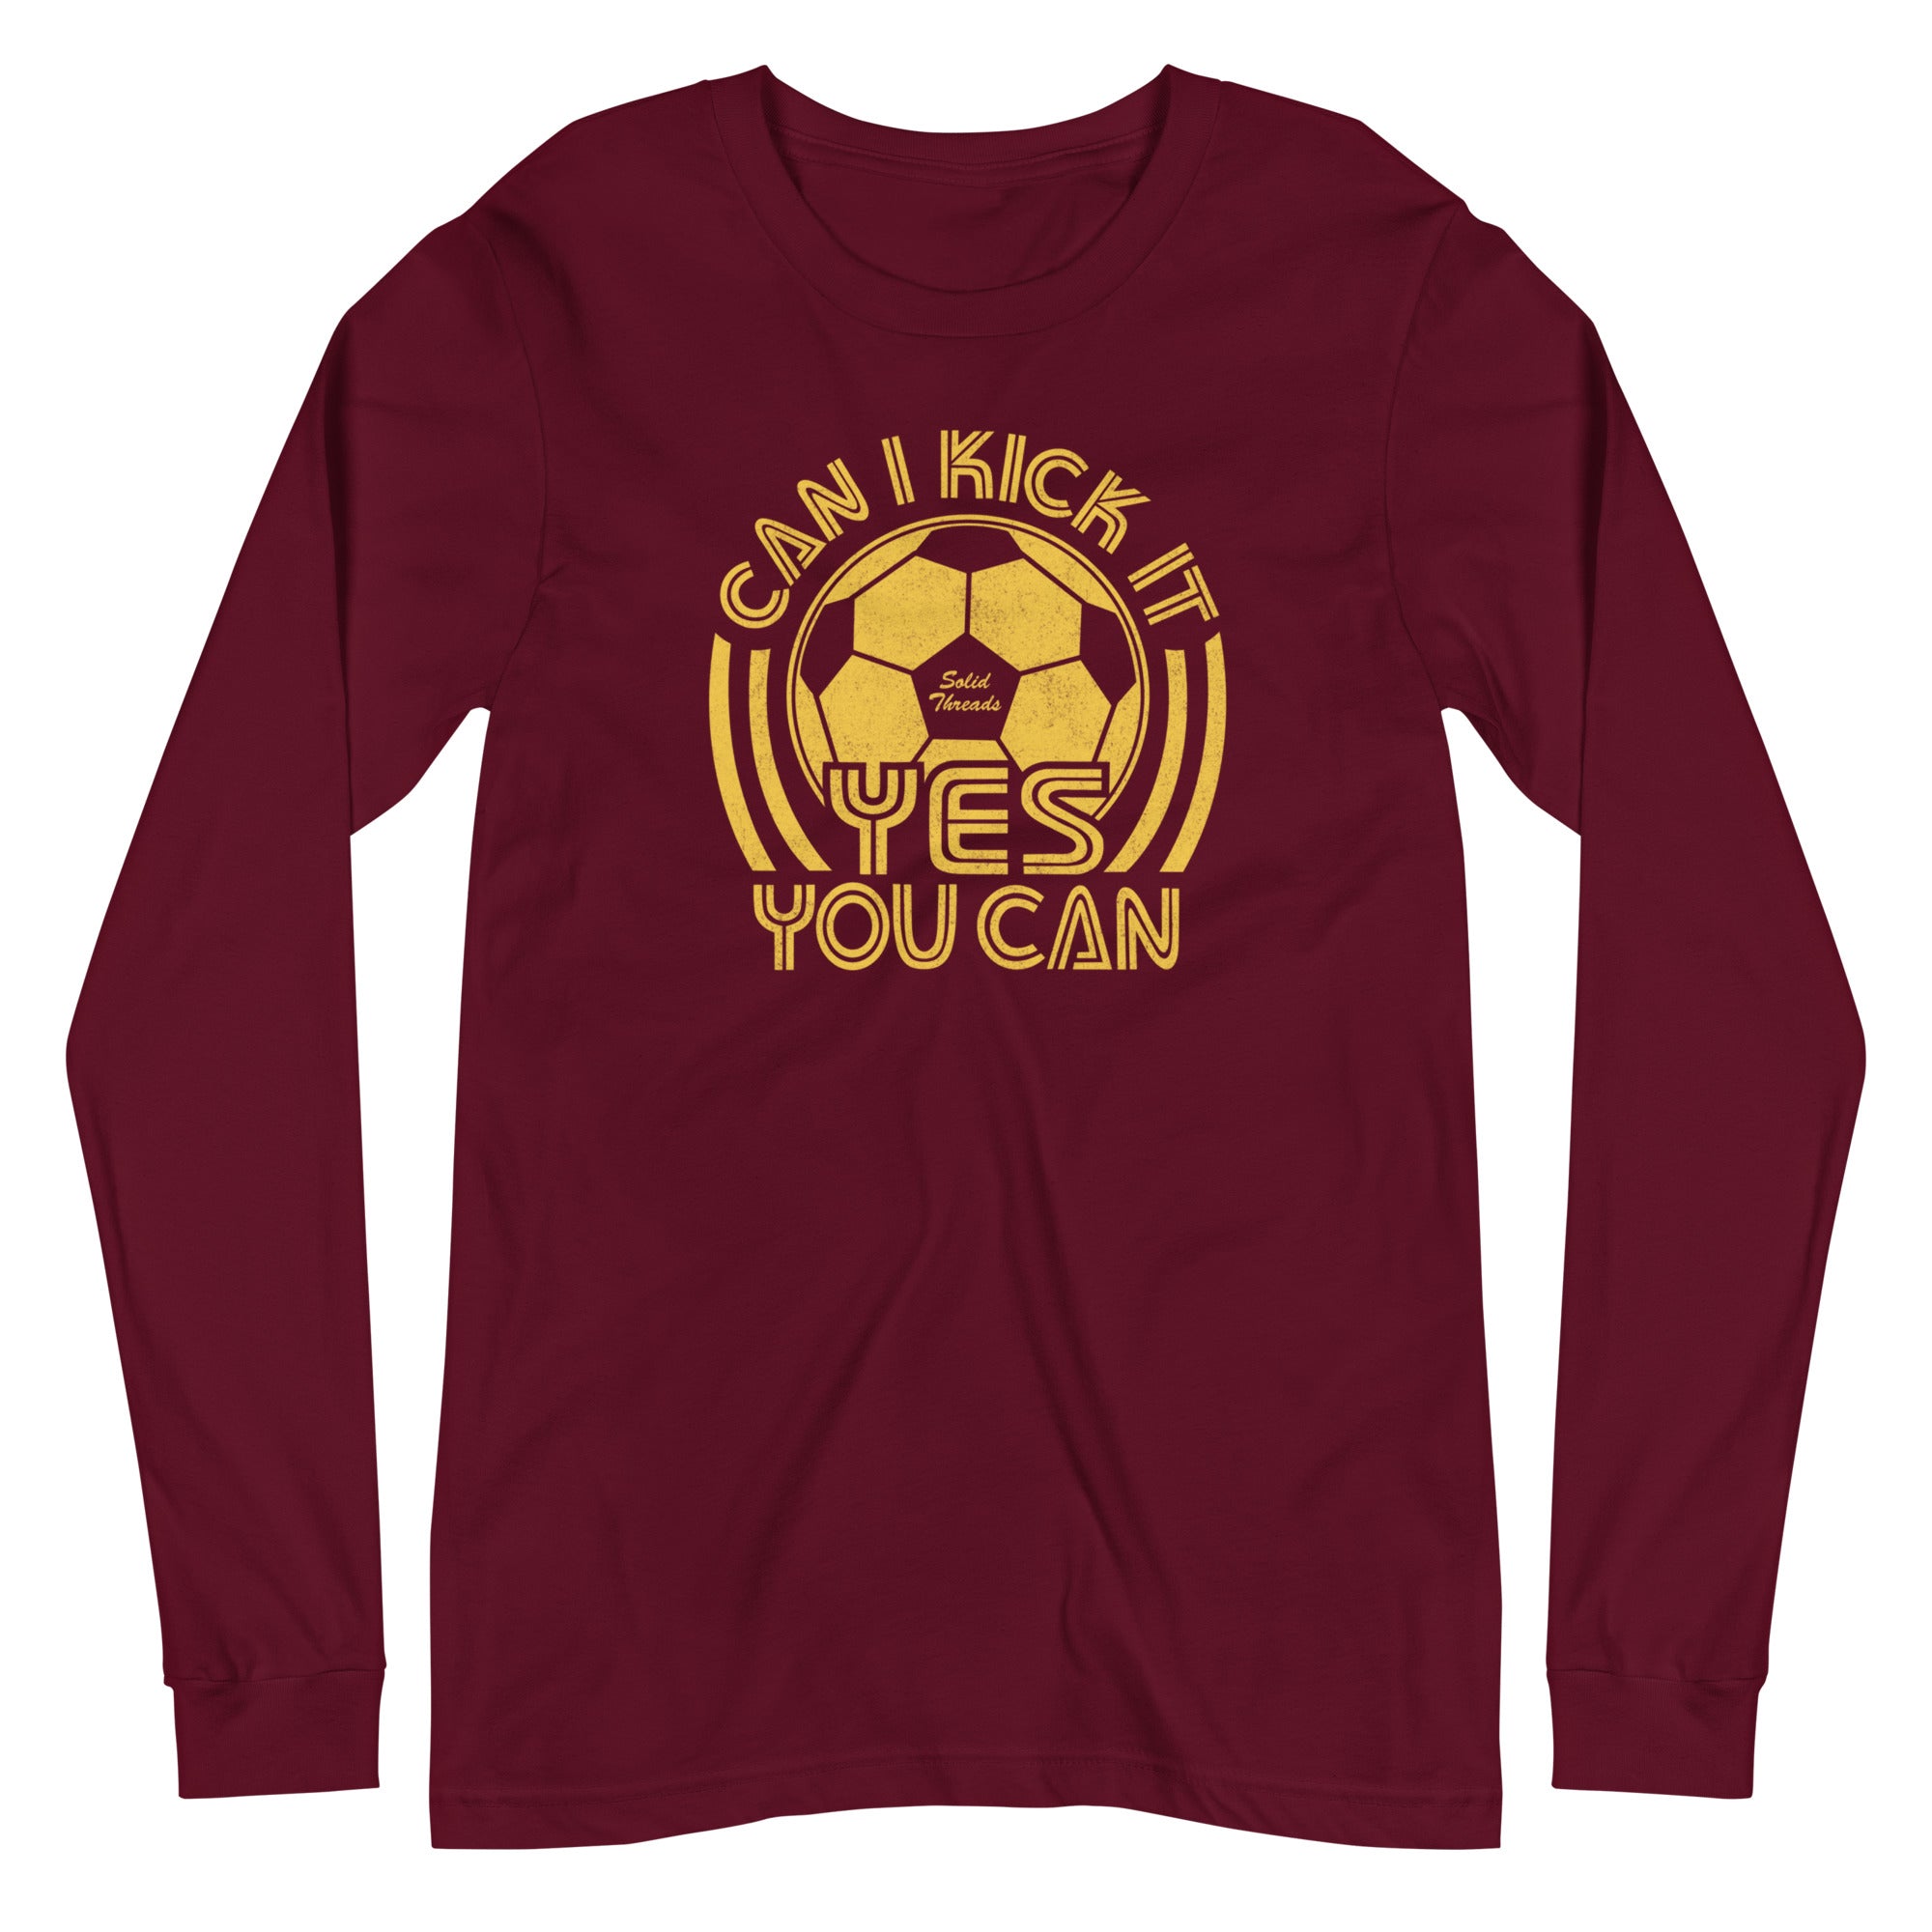 Unisex Can I Kick It, Yes You Can Long Sleeve Funny Graphic Tee | Vintage Soccer Maroon T shirt | Solid Threads